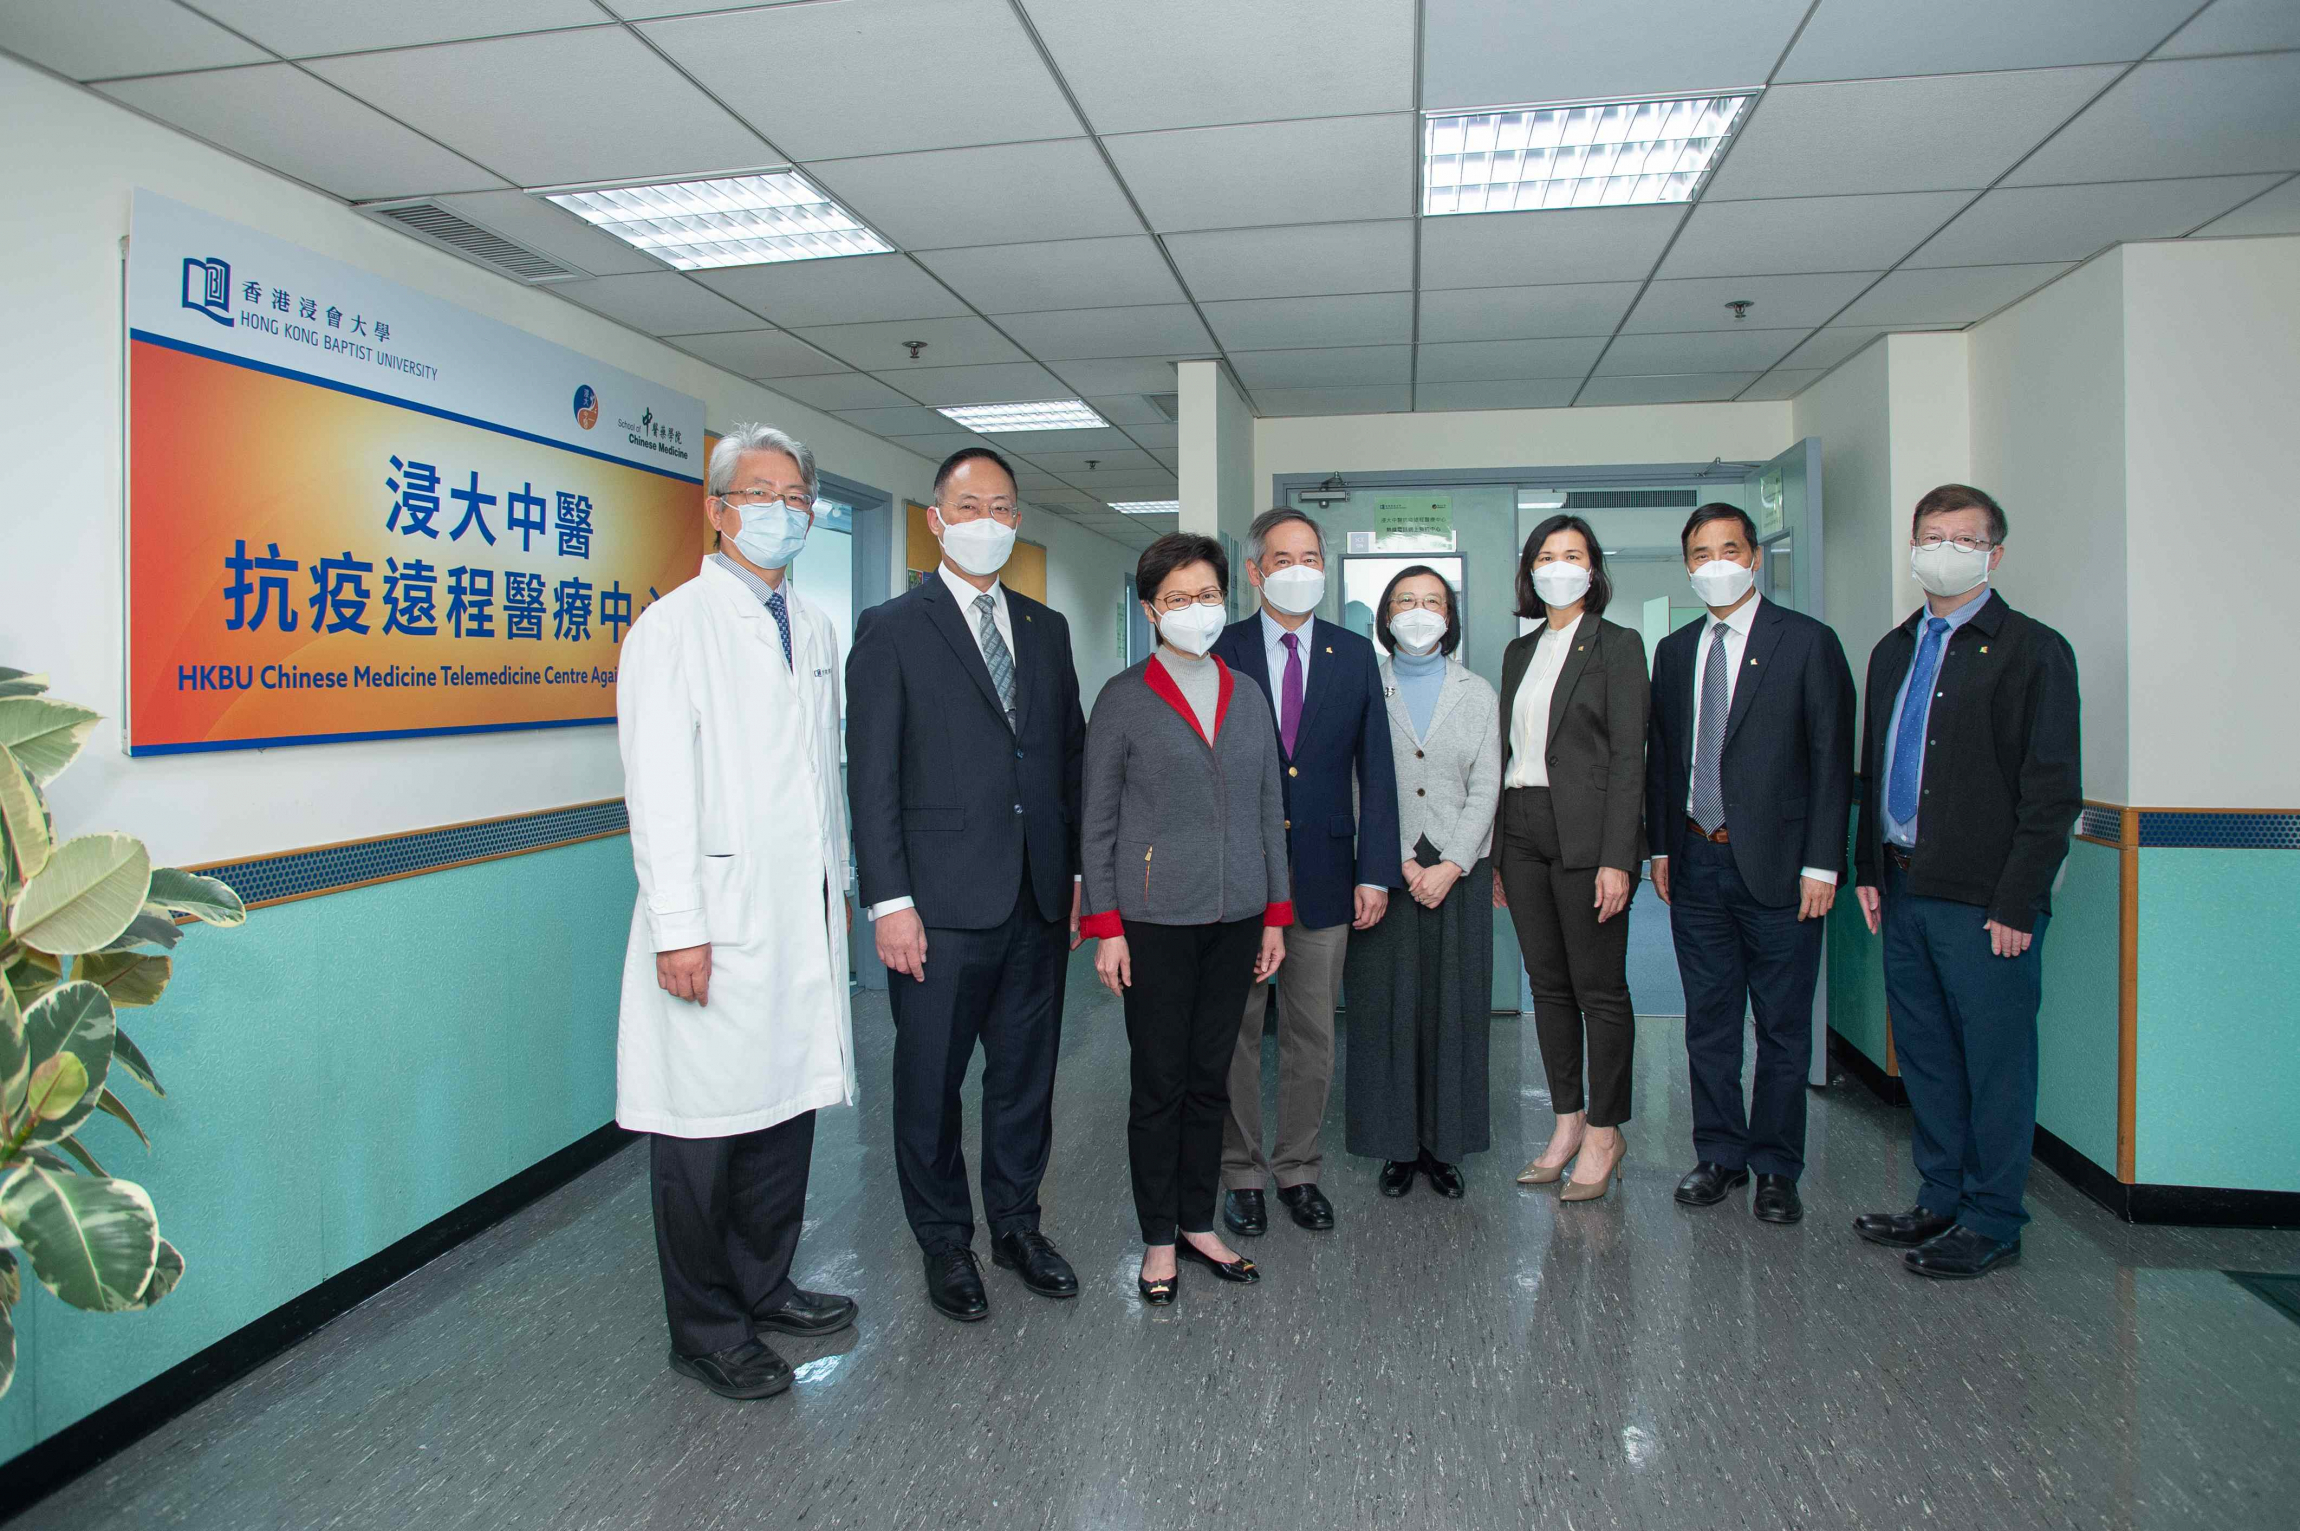 Mrs Carrie Lam, Chief Executive of the Hong Kong Special Administrative Region (3rd left) and Professor Sophia Chan, Secretary for Food and Health (4th right) visit the HKBU Chinese Medicine Telemedicine Centre Against COVID-19. They are received by Dr Clement Chen, Chairman of the Council and the Court (4th left); Professor Alexander Wai, President and Vice-Chancellor (2nd left); Ms Christine Chow Oi-wan, Vice-President (Administration) and Secretary (3rd right); Professor Bian Zhaoxiang, Associate Vice-President (Chinese Medicine Development) (1st left); Professor Lyu Aiping, Dean of the School of Chinese Medicine (2nd right); and Professor Daniel Lai Wing-leung, Dean of the Faculty of Social Sciences (1st right) of HKBU.